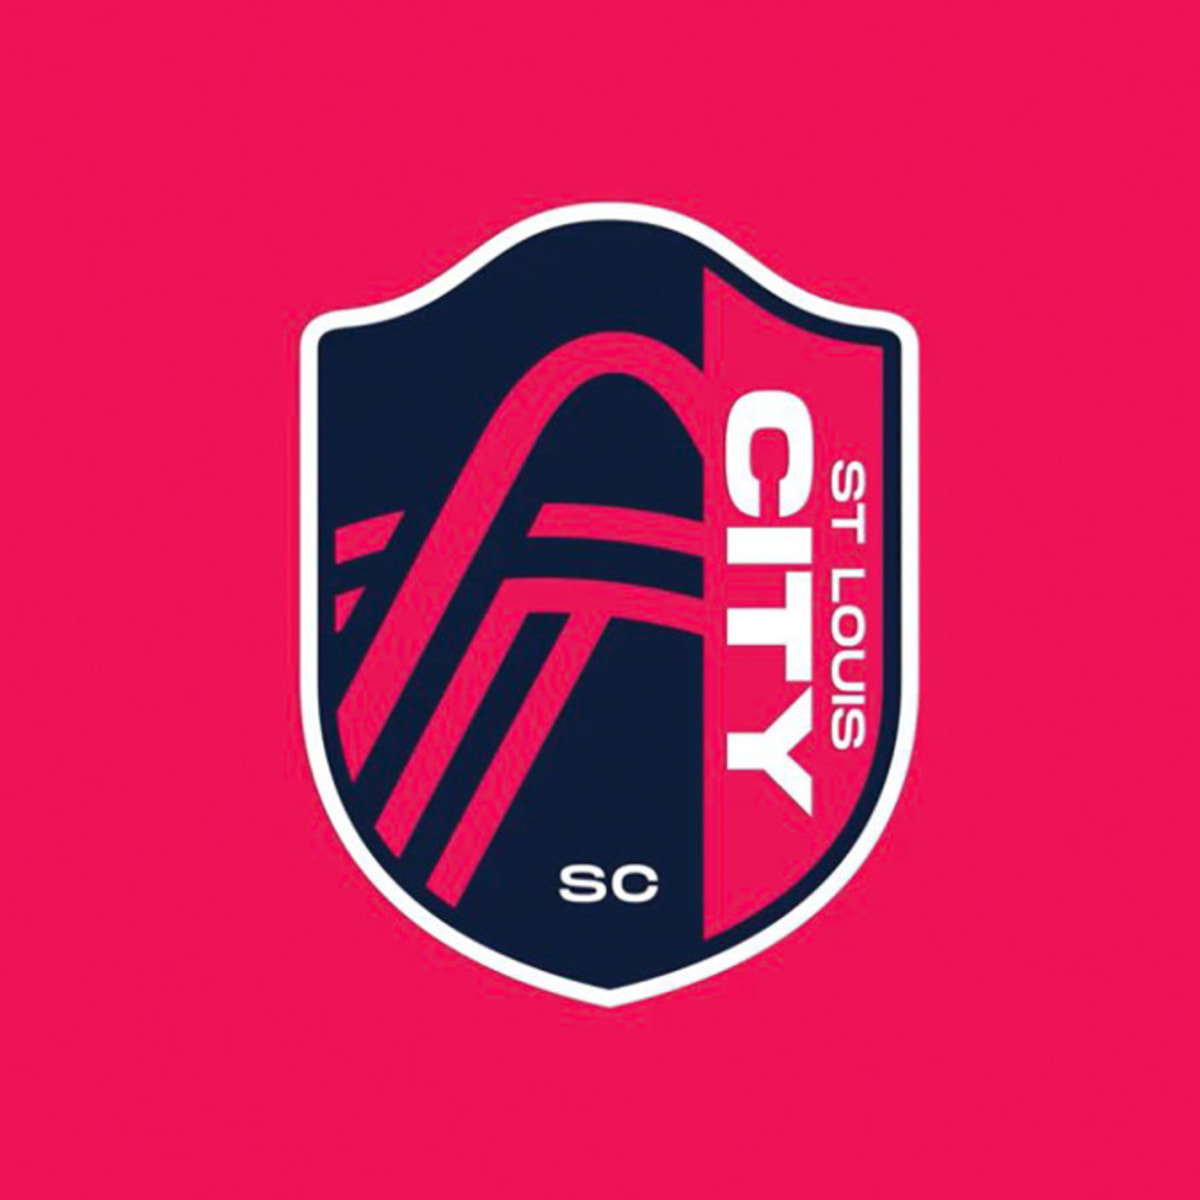 St. Louis City to be MLS' new team in 2023